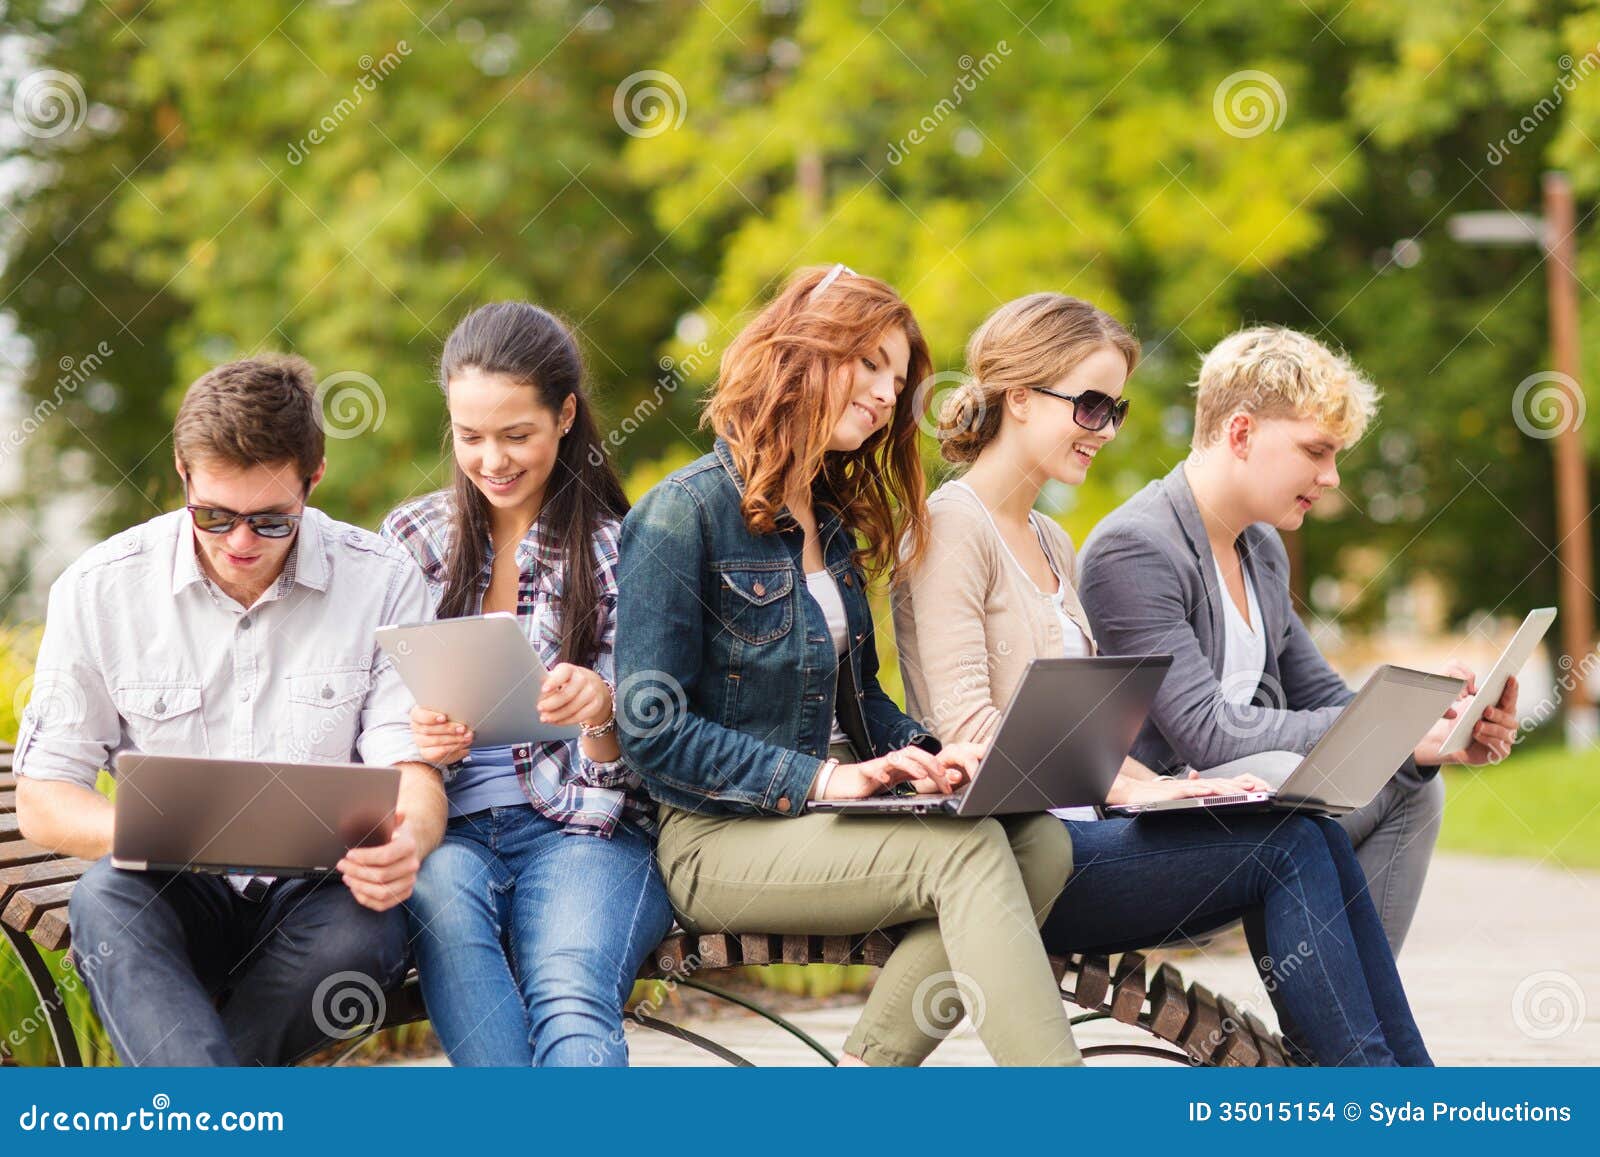 students or teenagers with laptop computers